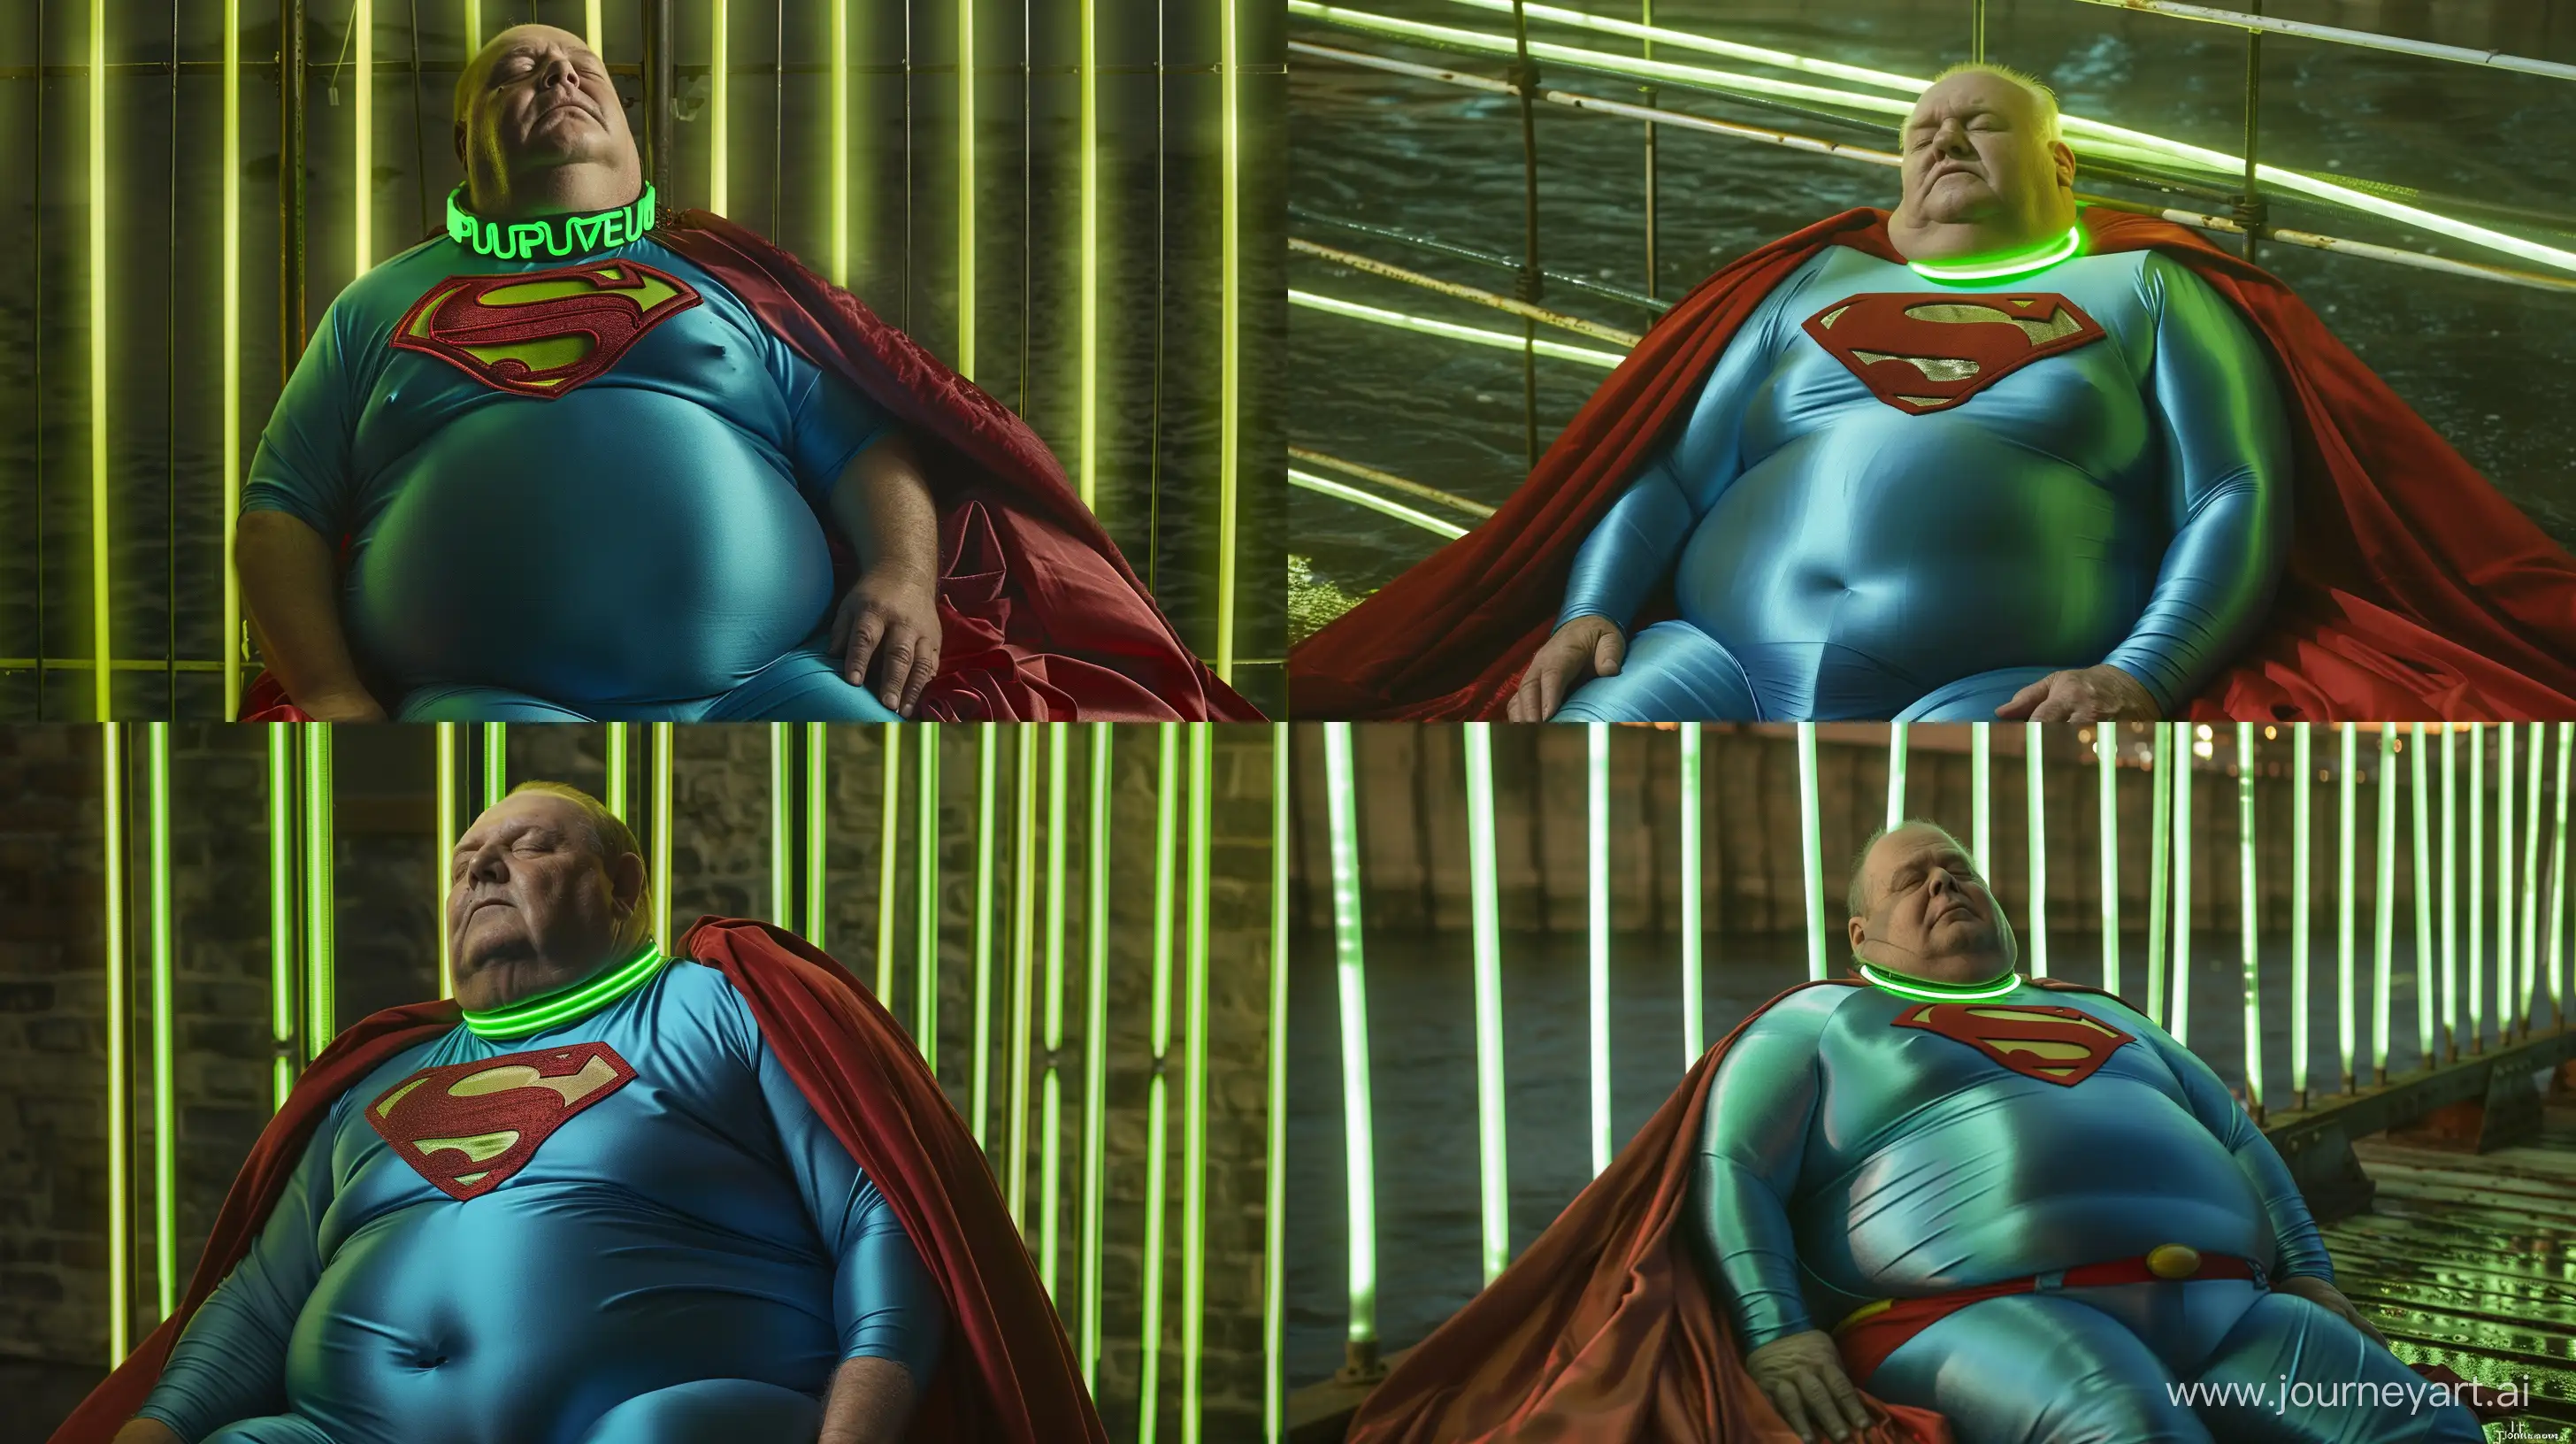 Elderly-Superman-Rests-Against-Glowing-Neon-Bars-by-the-River